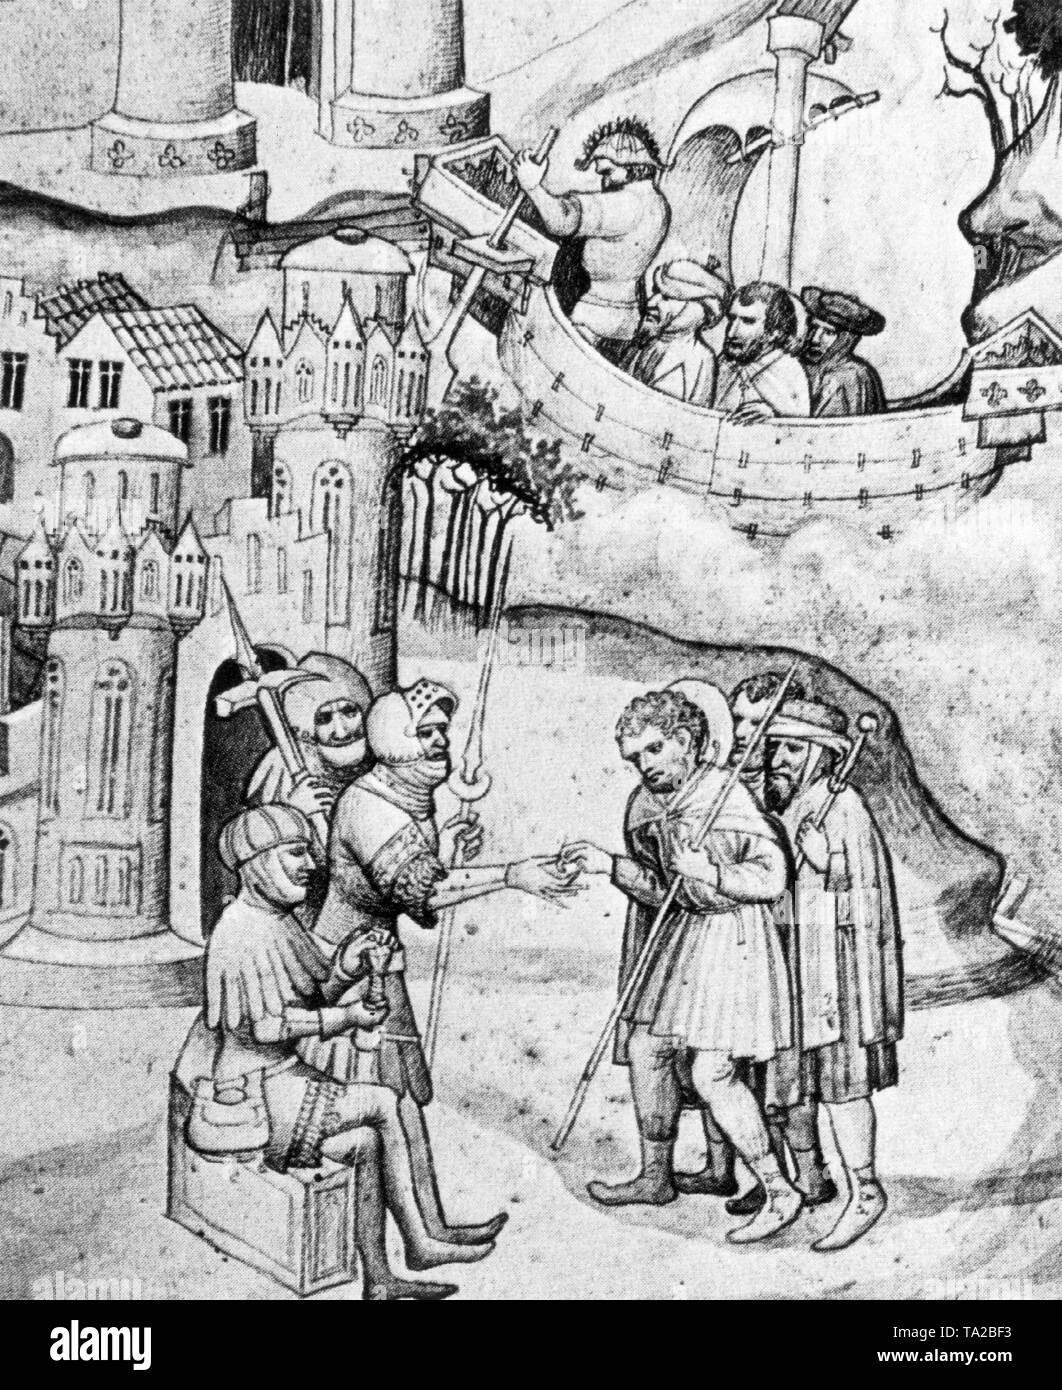 Pilgrims on their way to Jerusalem must pay a toll for using the road when entering the holy land in Jaffa. Illustration from a medieval manuscript (Estimated date). Stock Photo